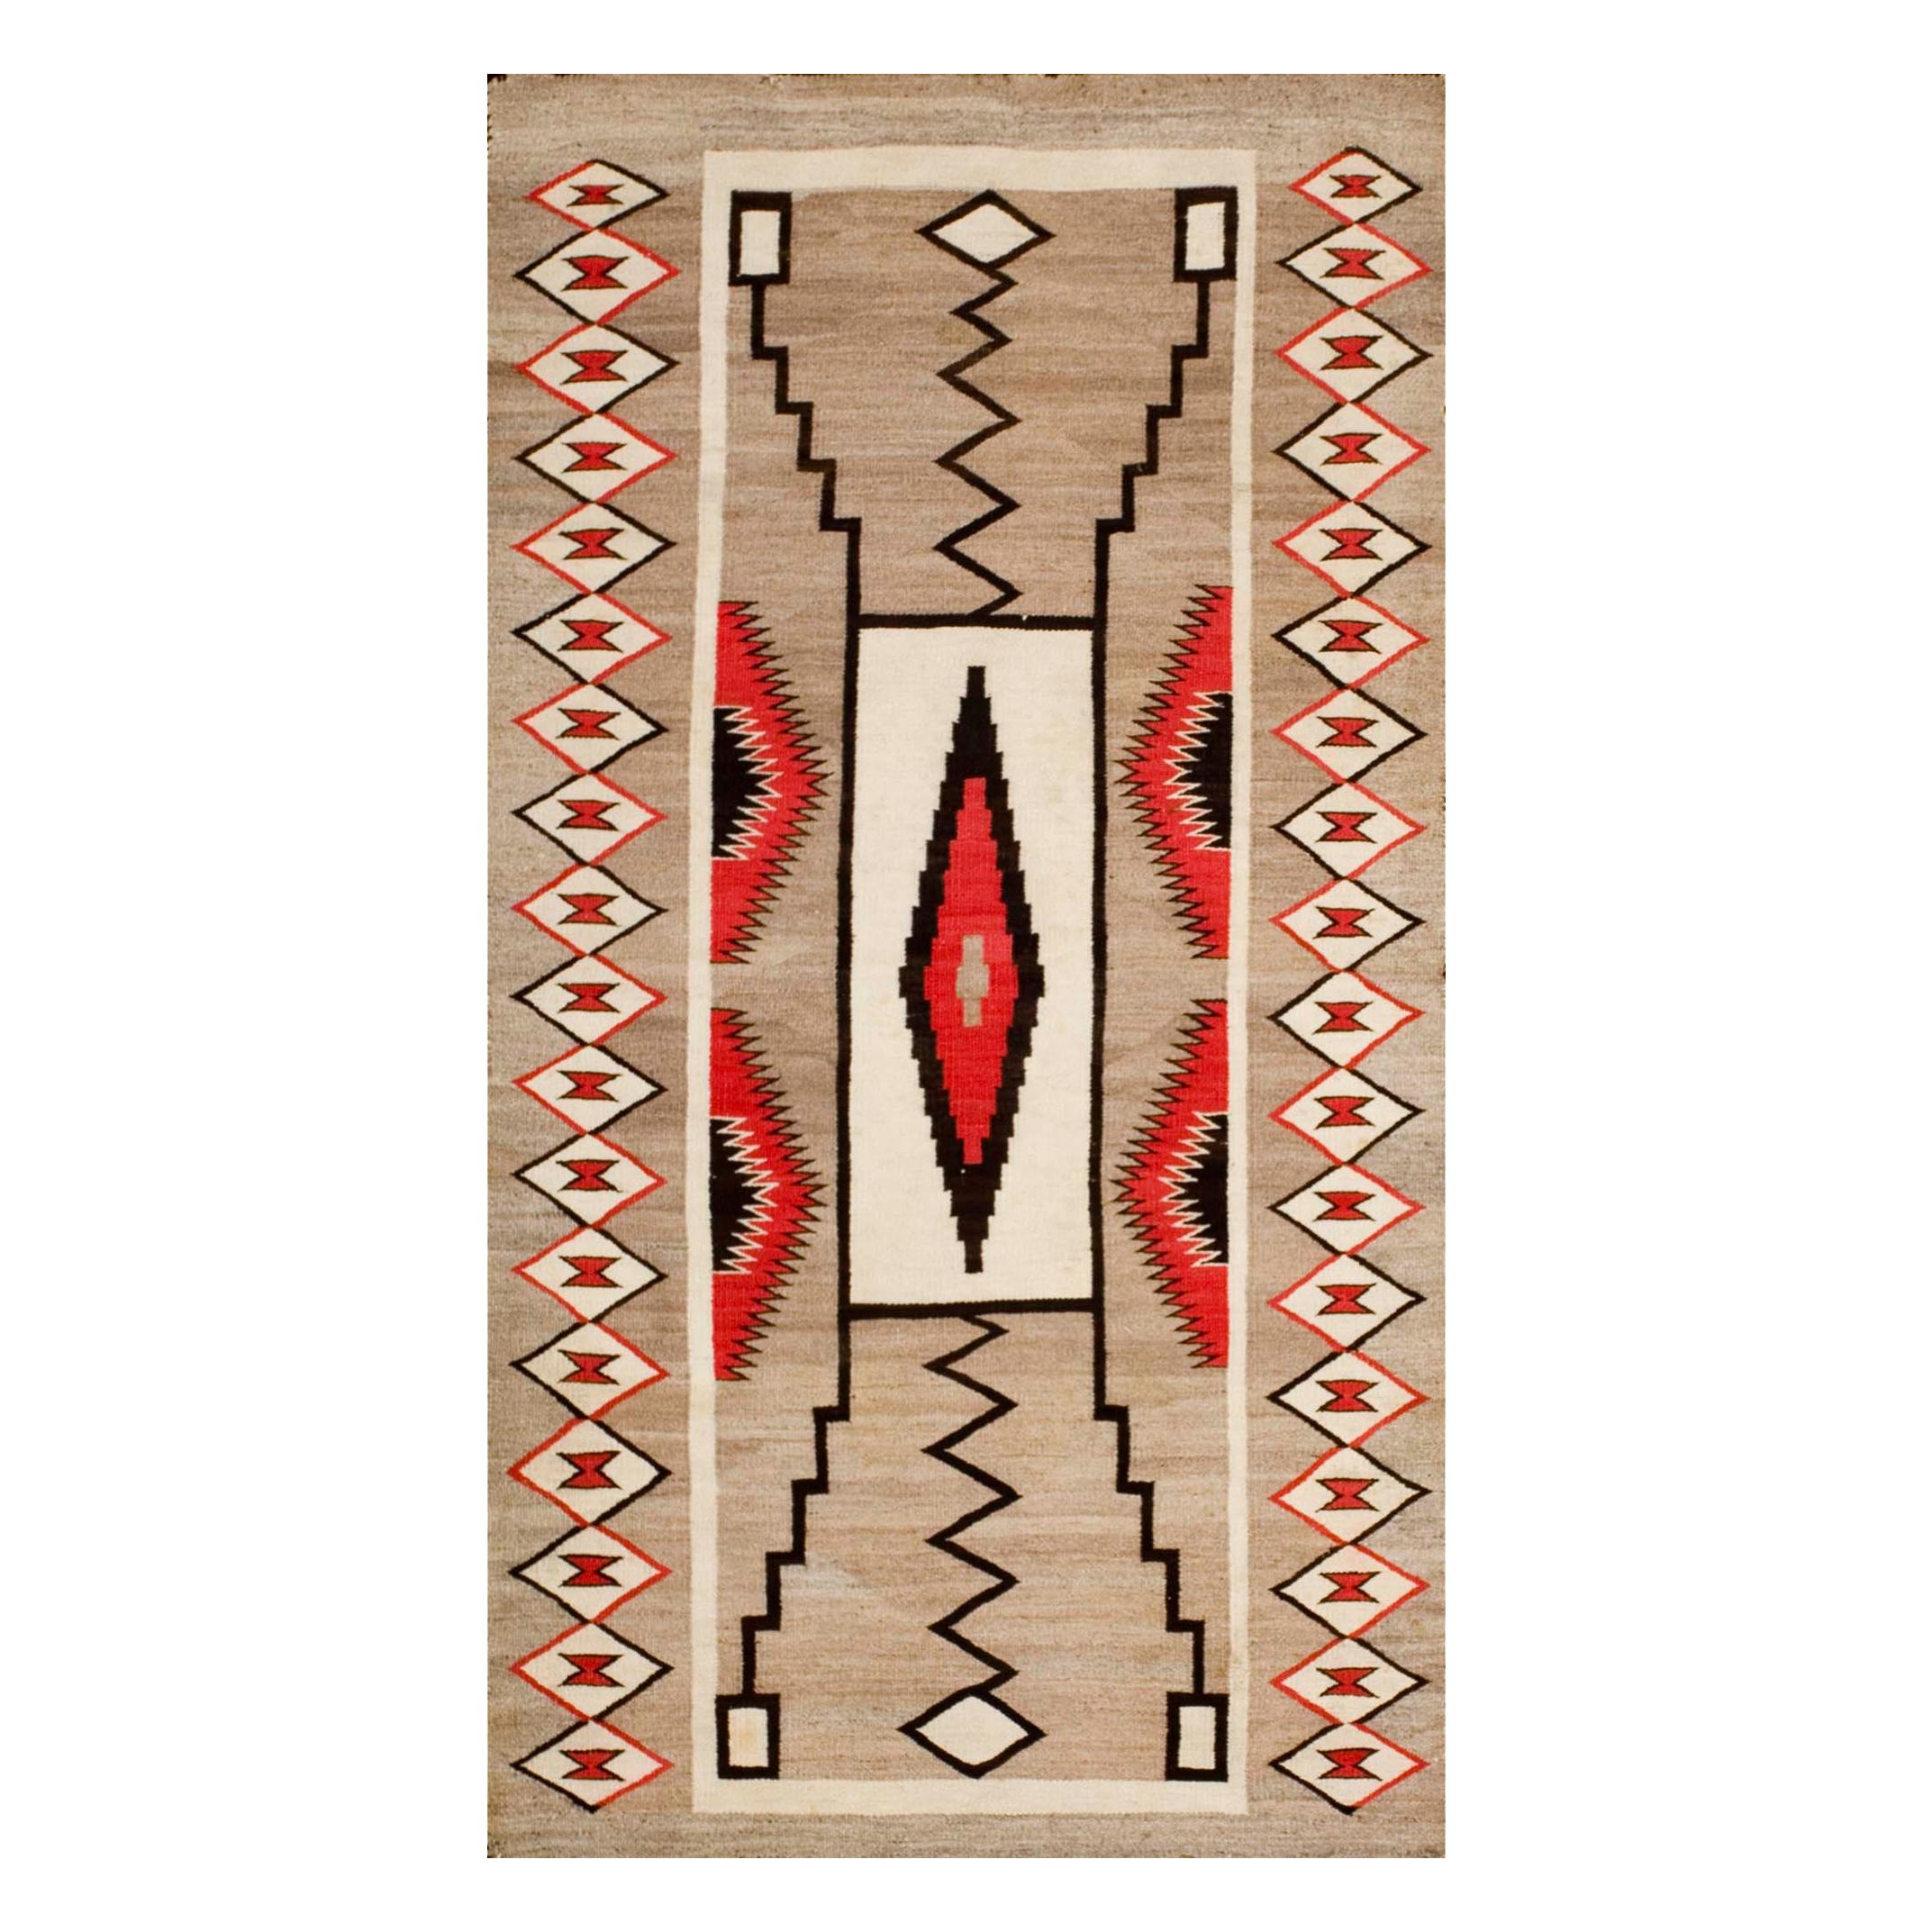 Early 20th Century American Navajo Storm Pattern Carpet ( 3' x 5'7" - 91 x 170 ) For Sale